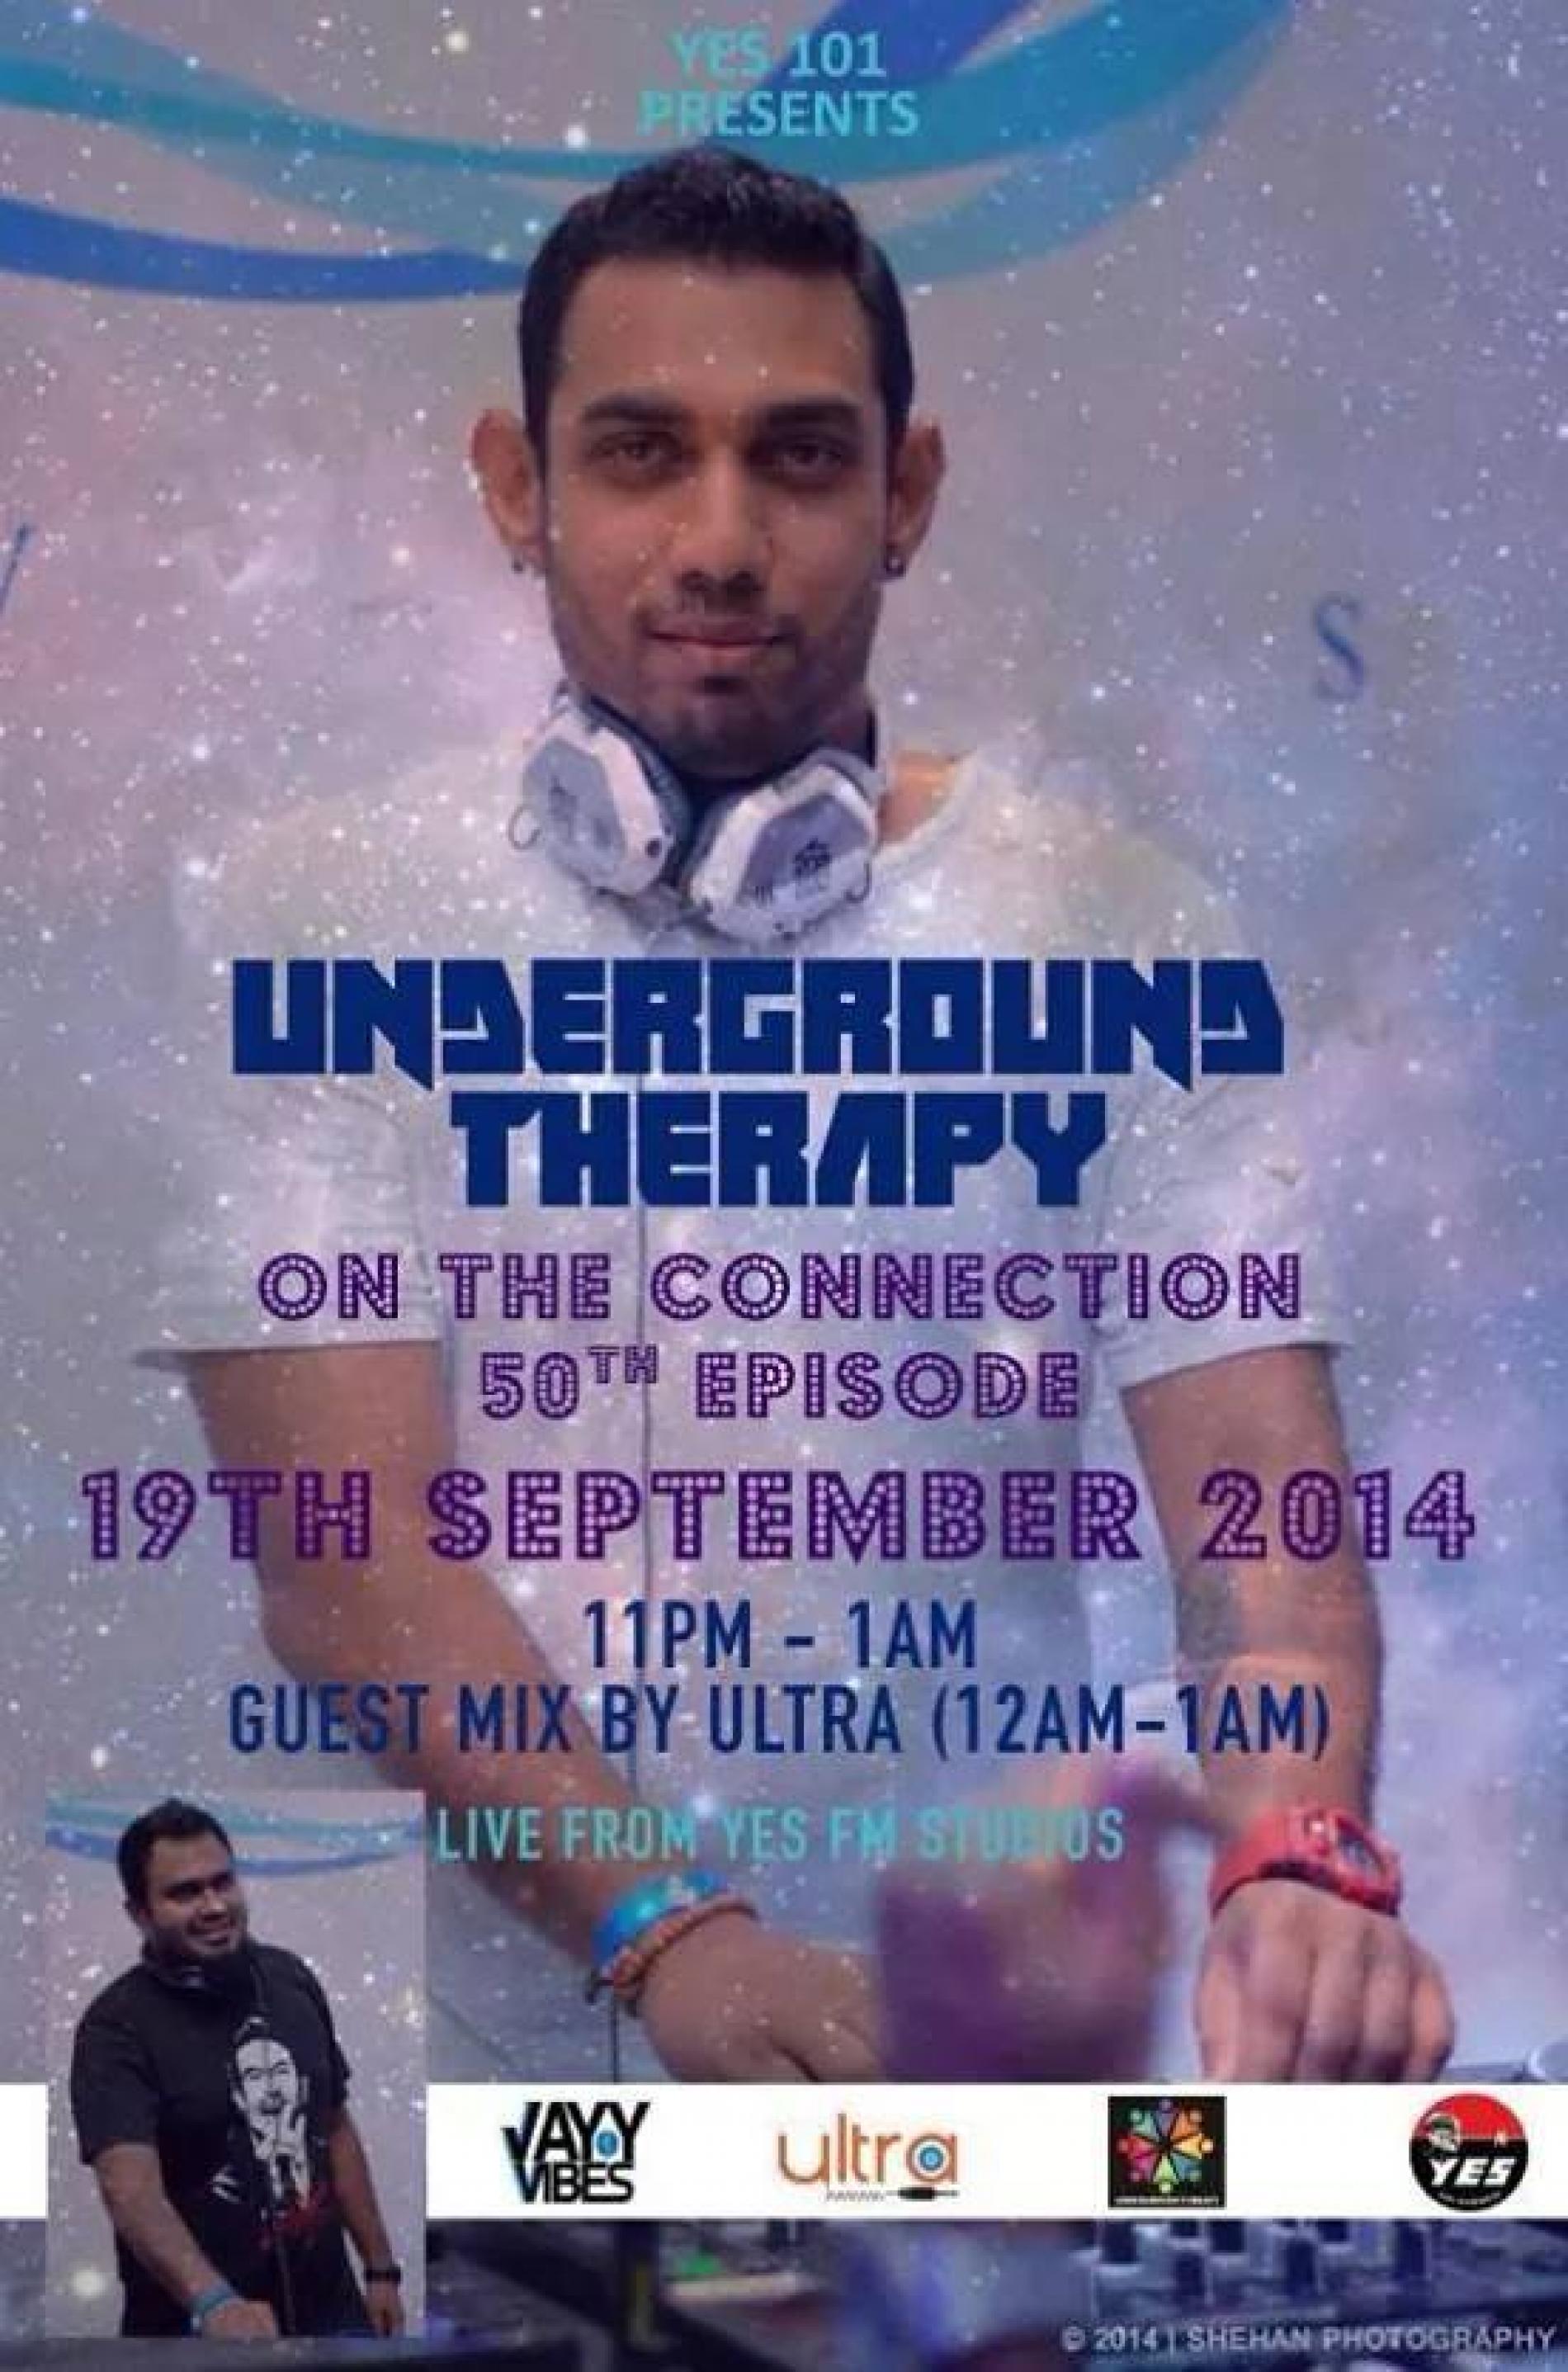 50th Edition Of Underground Therapy With Jayy Vibes